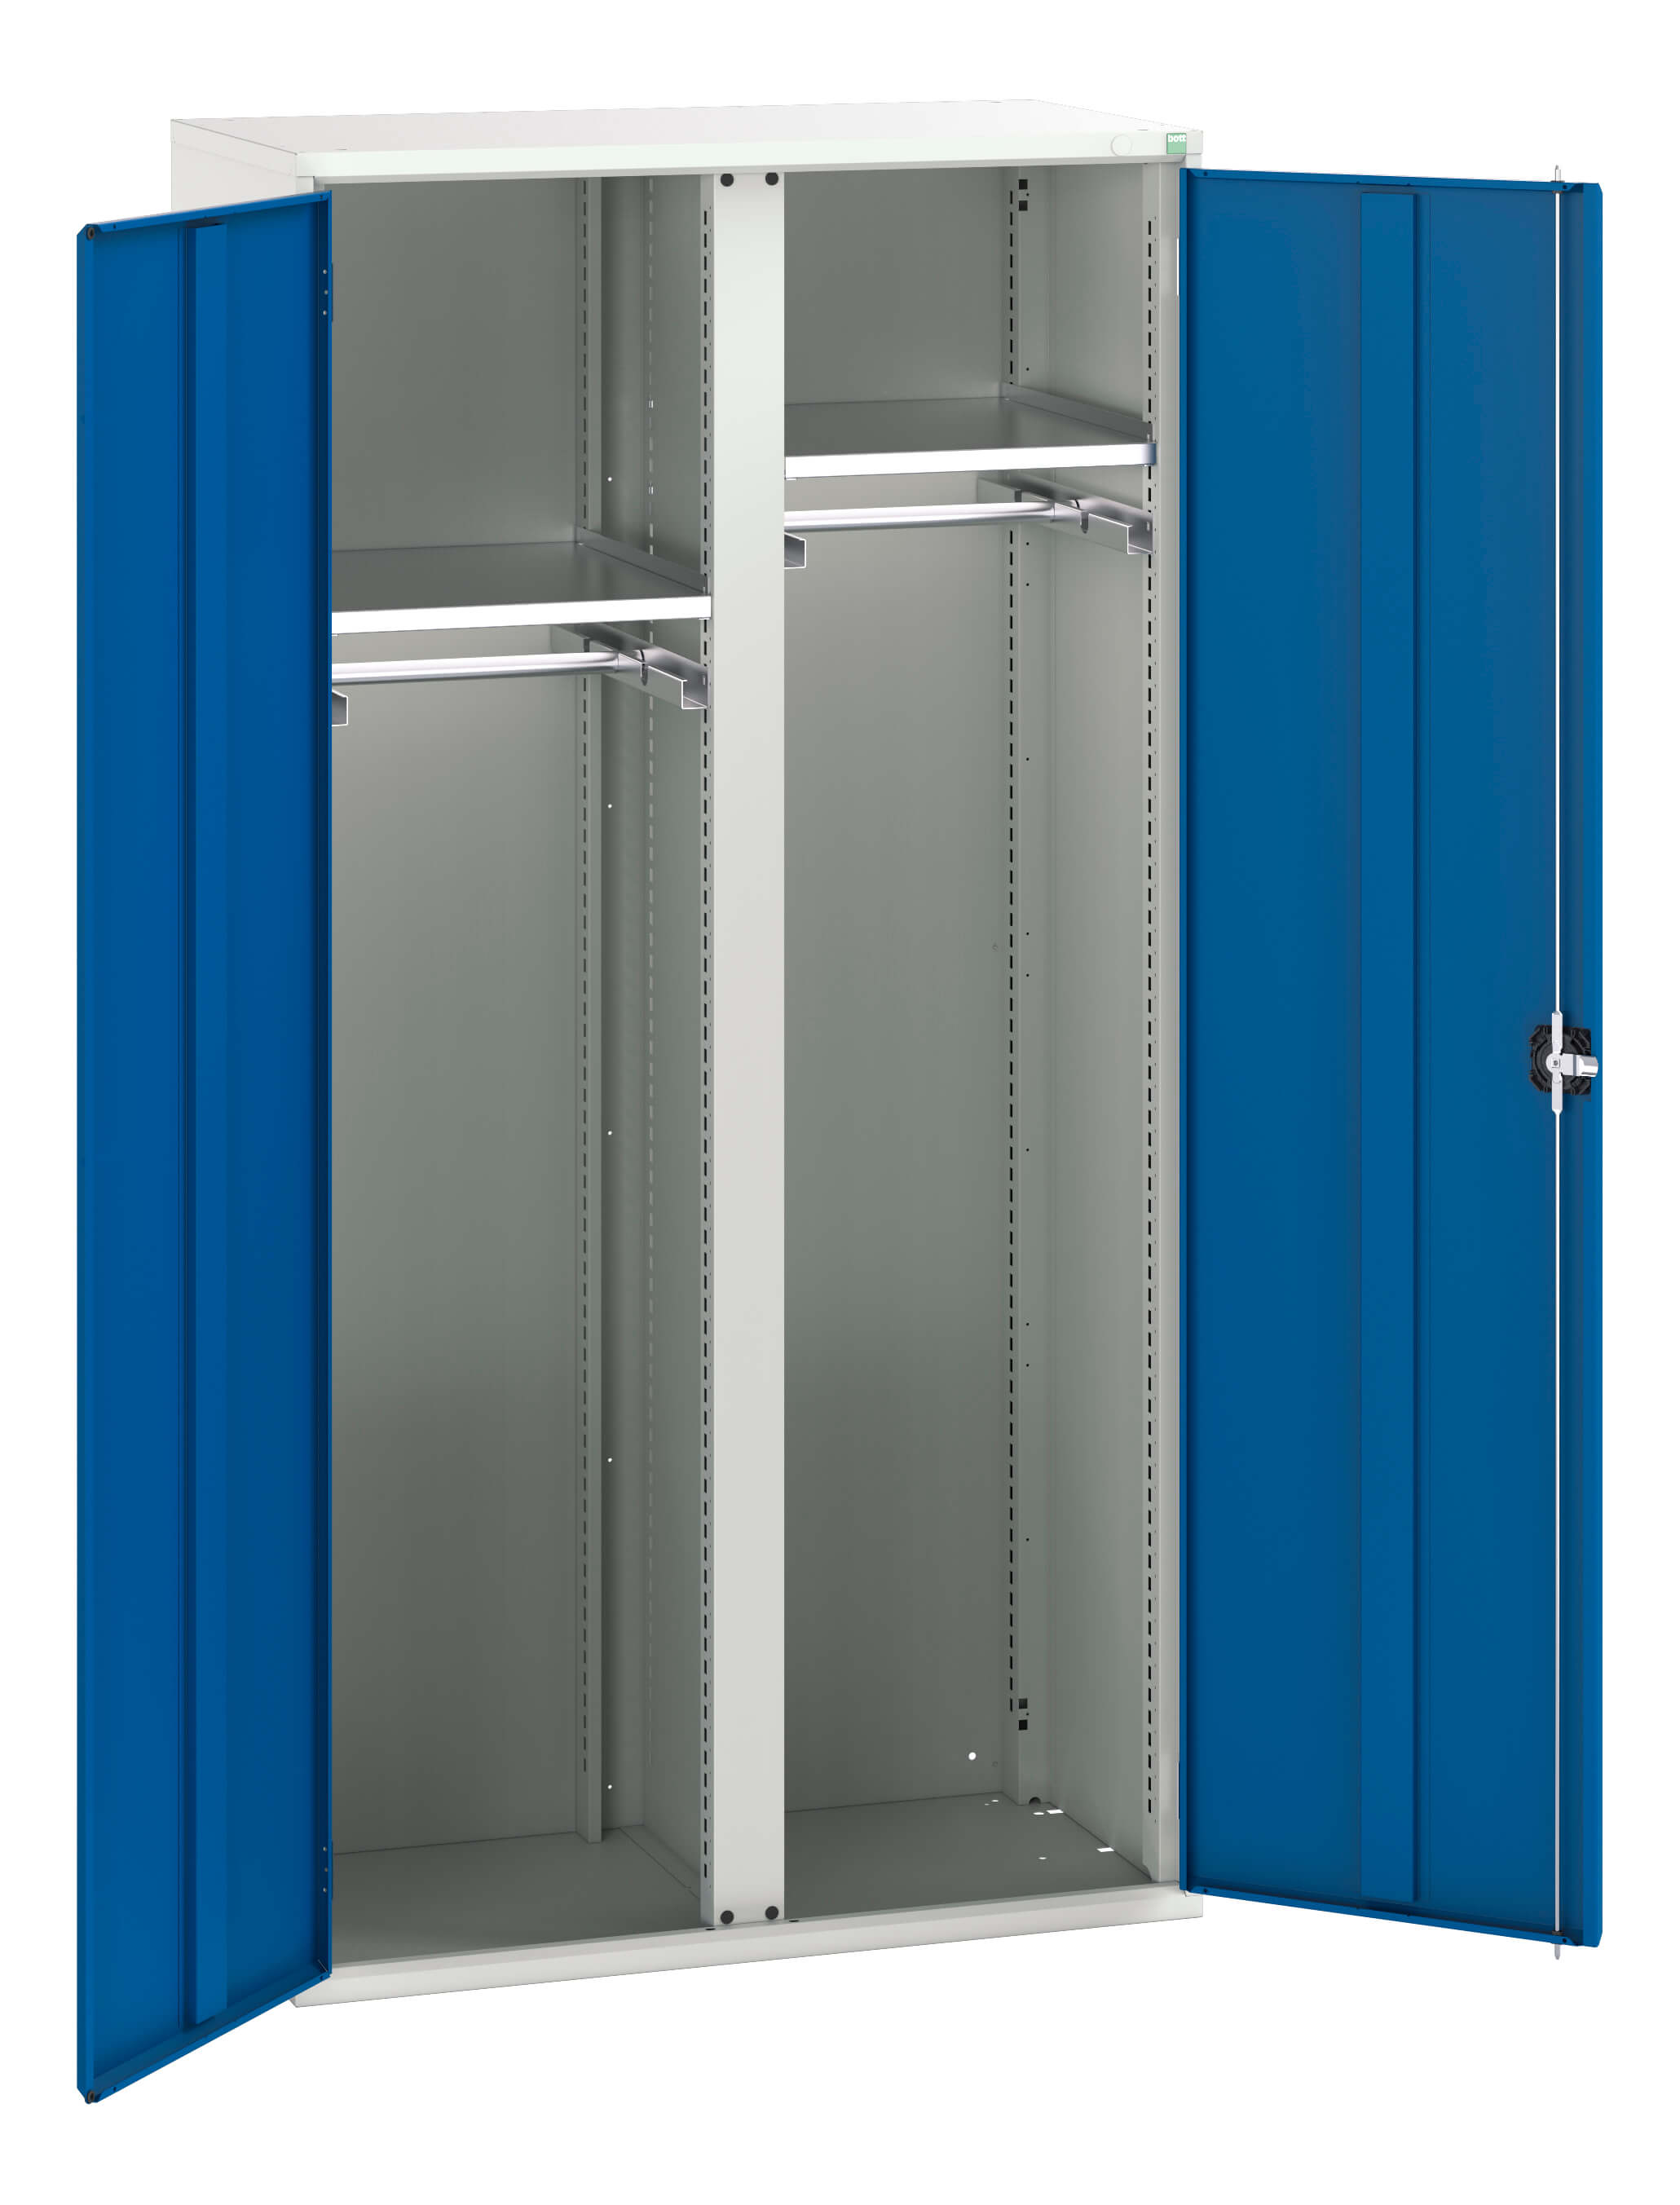 Bott Verso Ppe / Janitorial Kitted Cupboard With Vertical Partition - 16926578.11